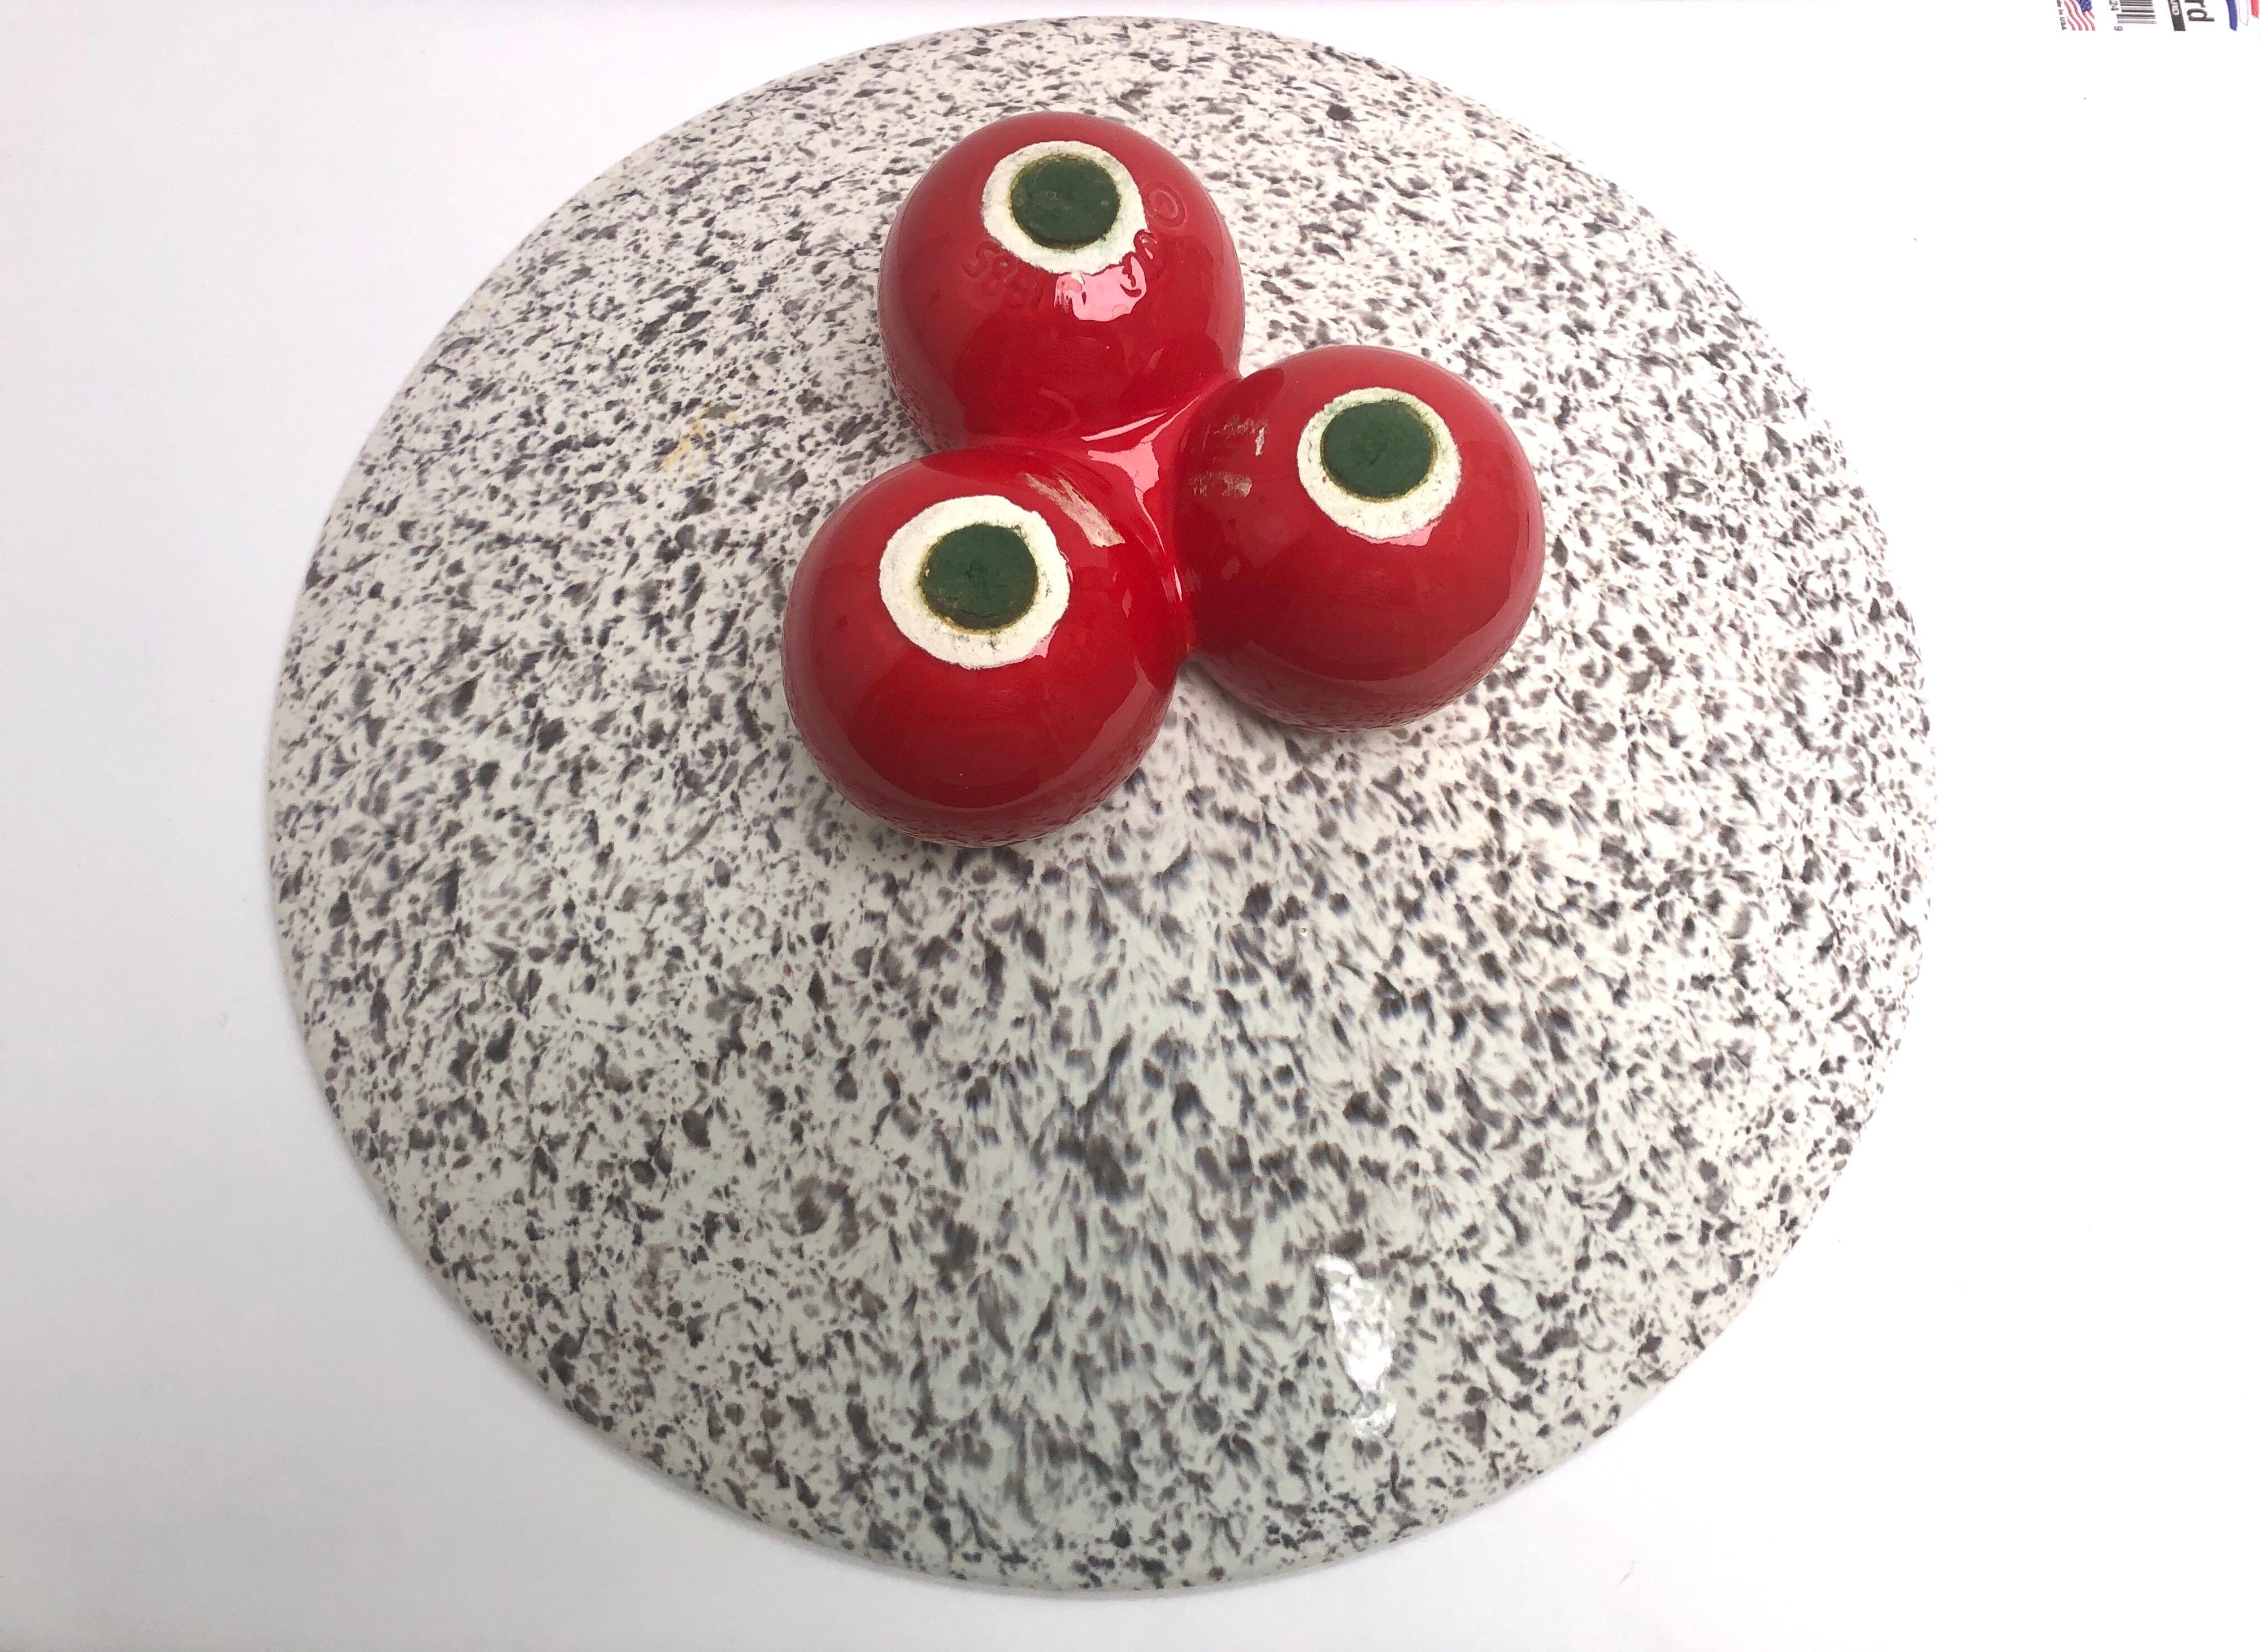 Large ceramic centerpiece by Jaru. It has the Classic granite look with 3 red spheres on the base. Simple clean design with unexpected finish.